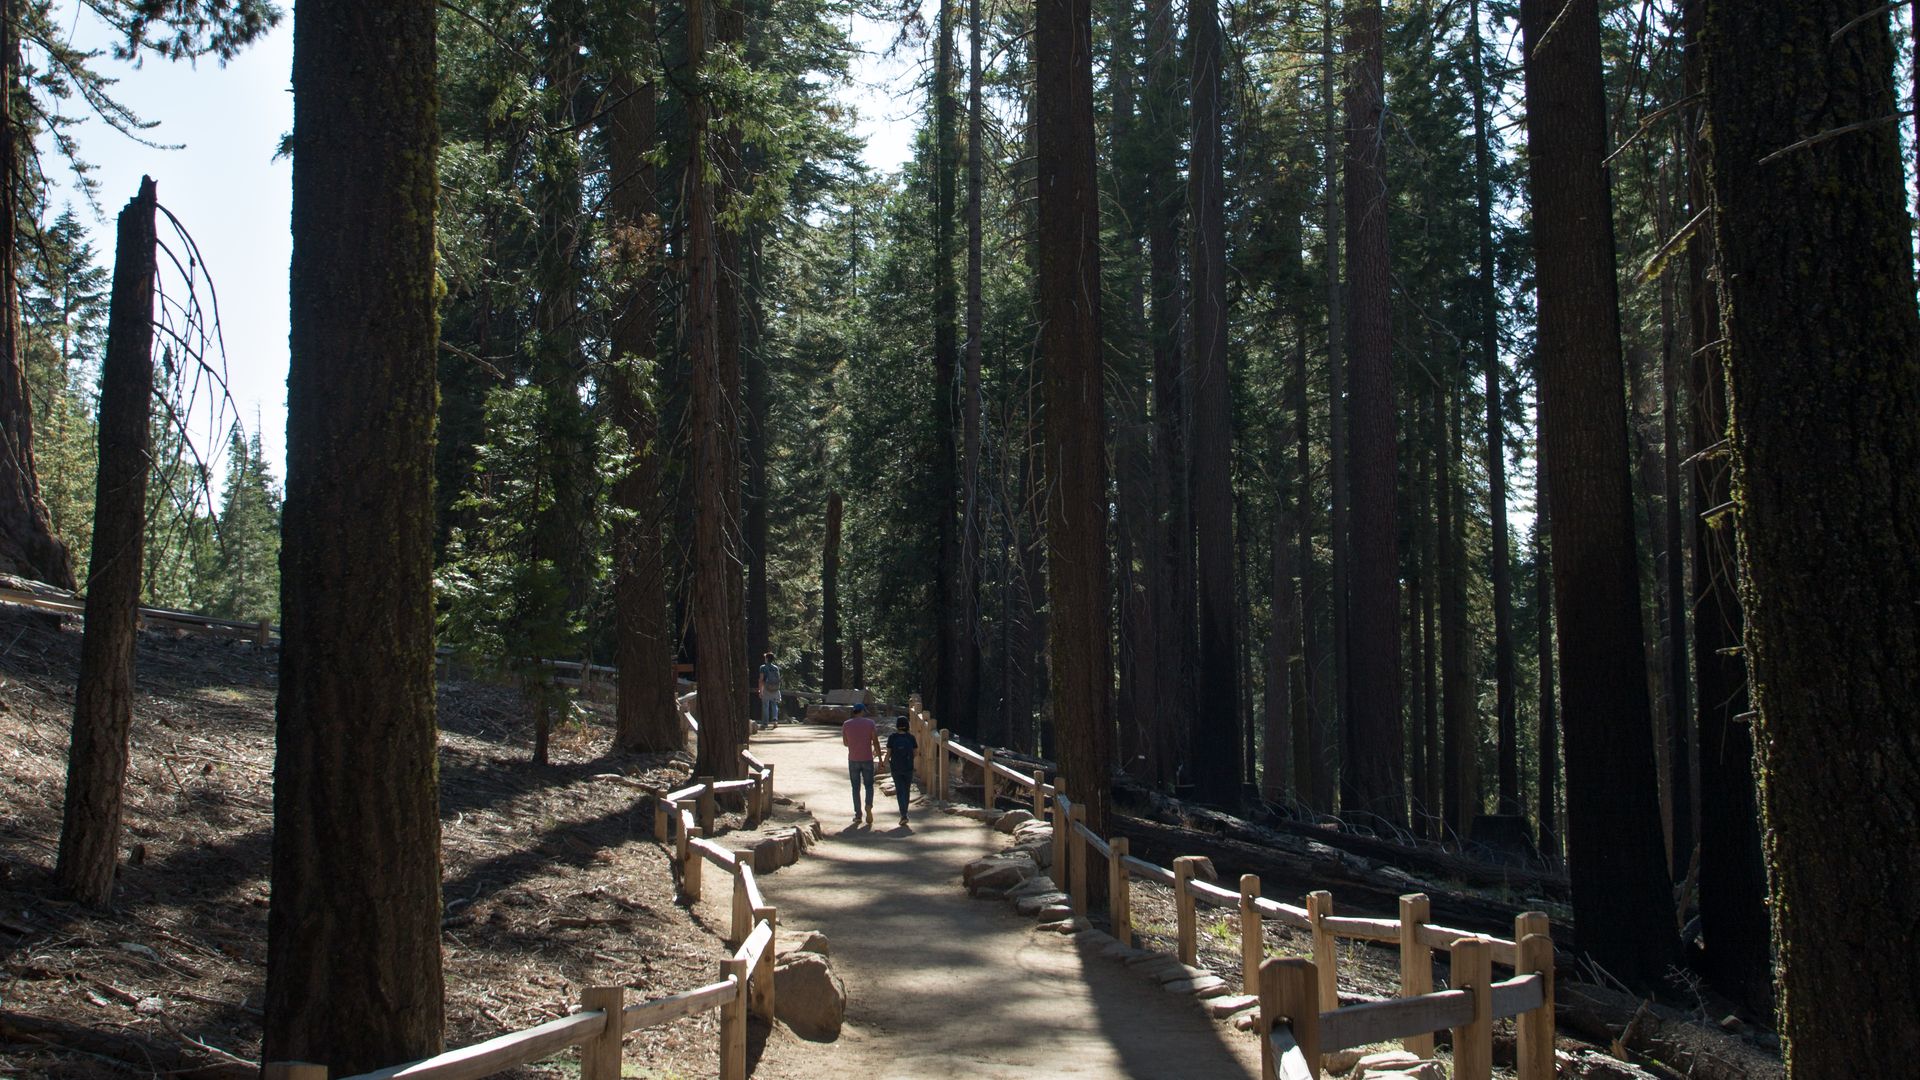 The boardwalk at Yosemite's Mariposa Grove of Giant Sequoias is viewed on October 6, 2019,